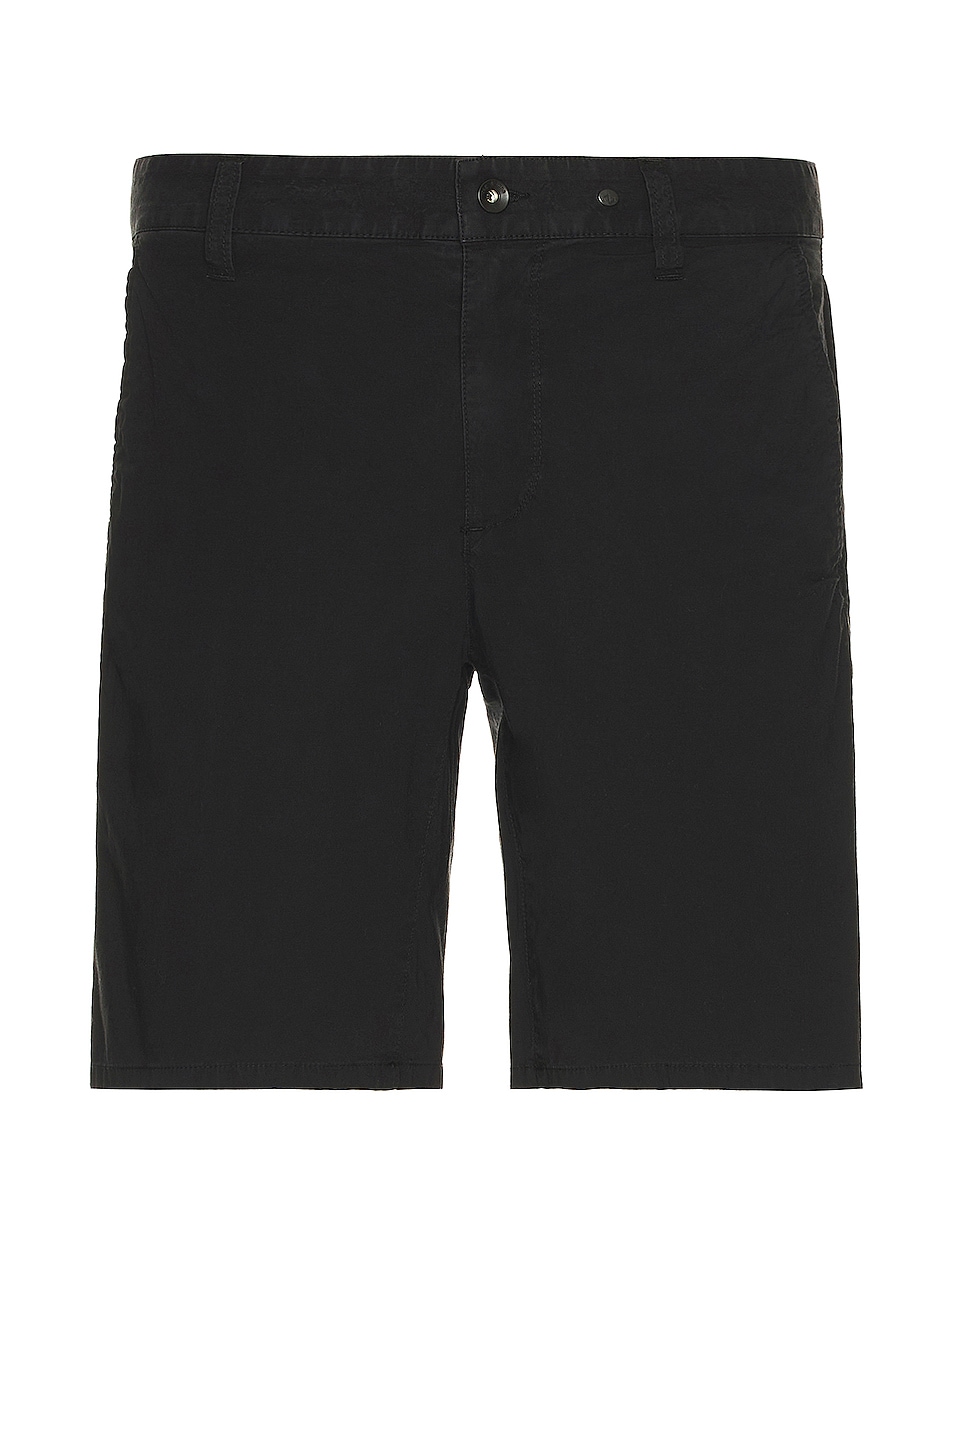 Image 1 of Rag & Bone Perry Stretch Paper Shorts in Black